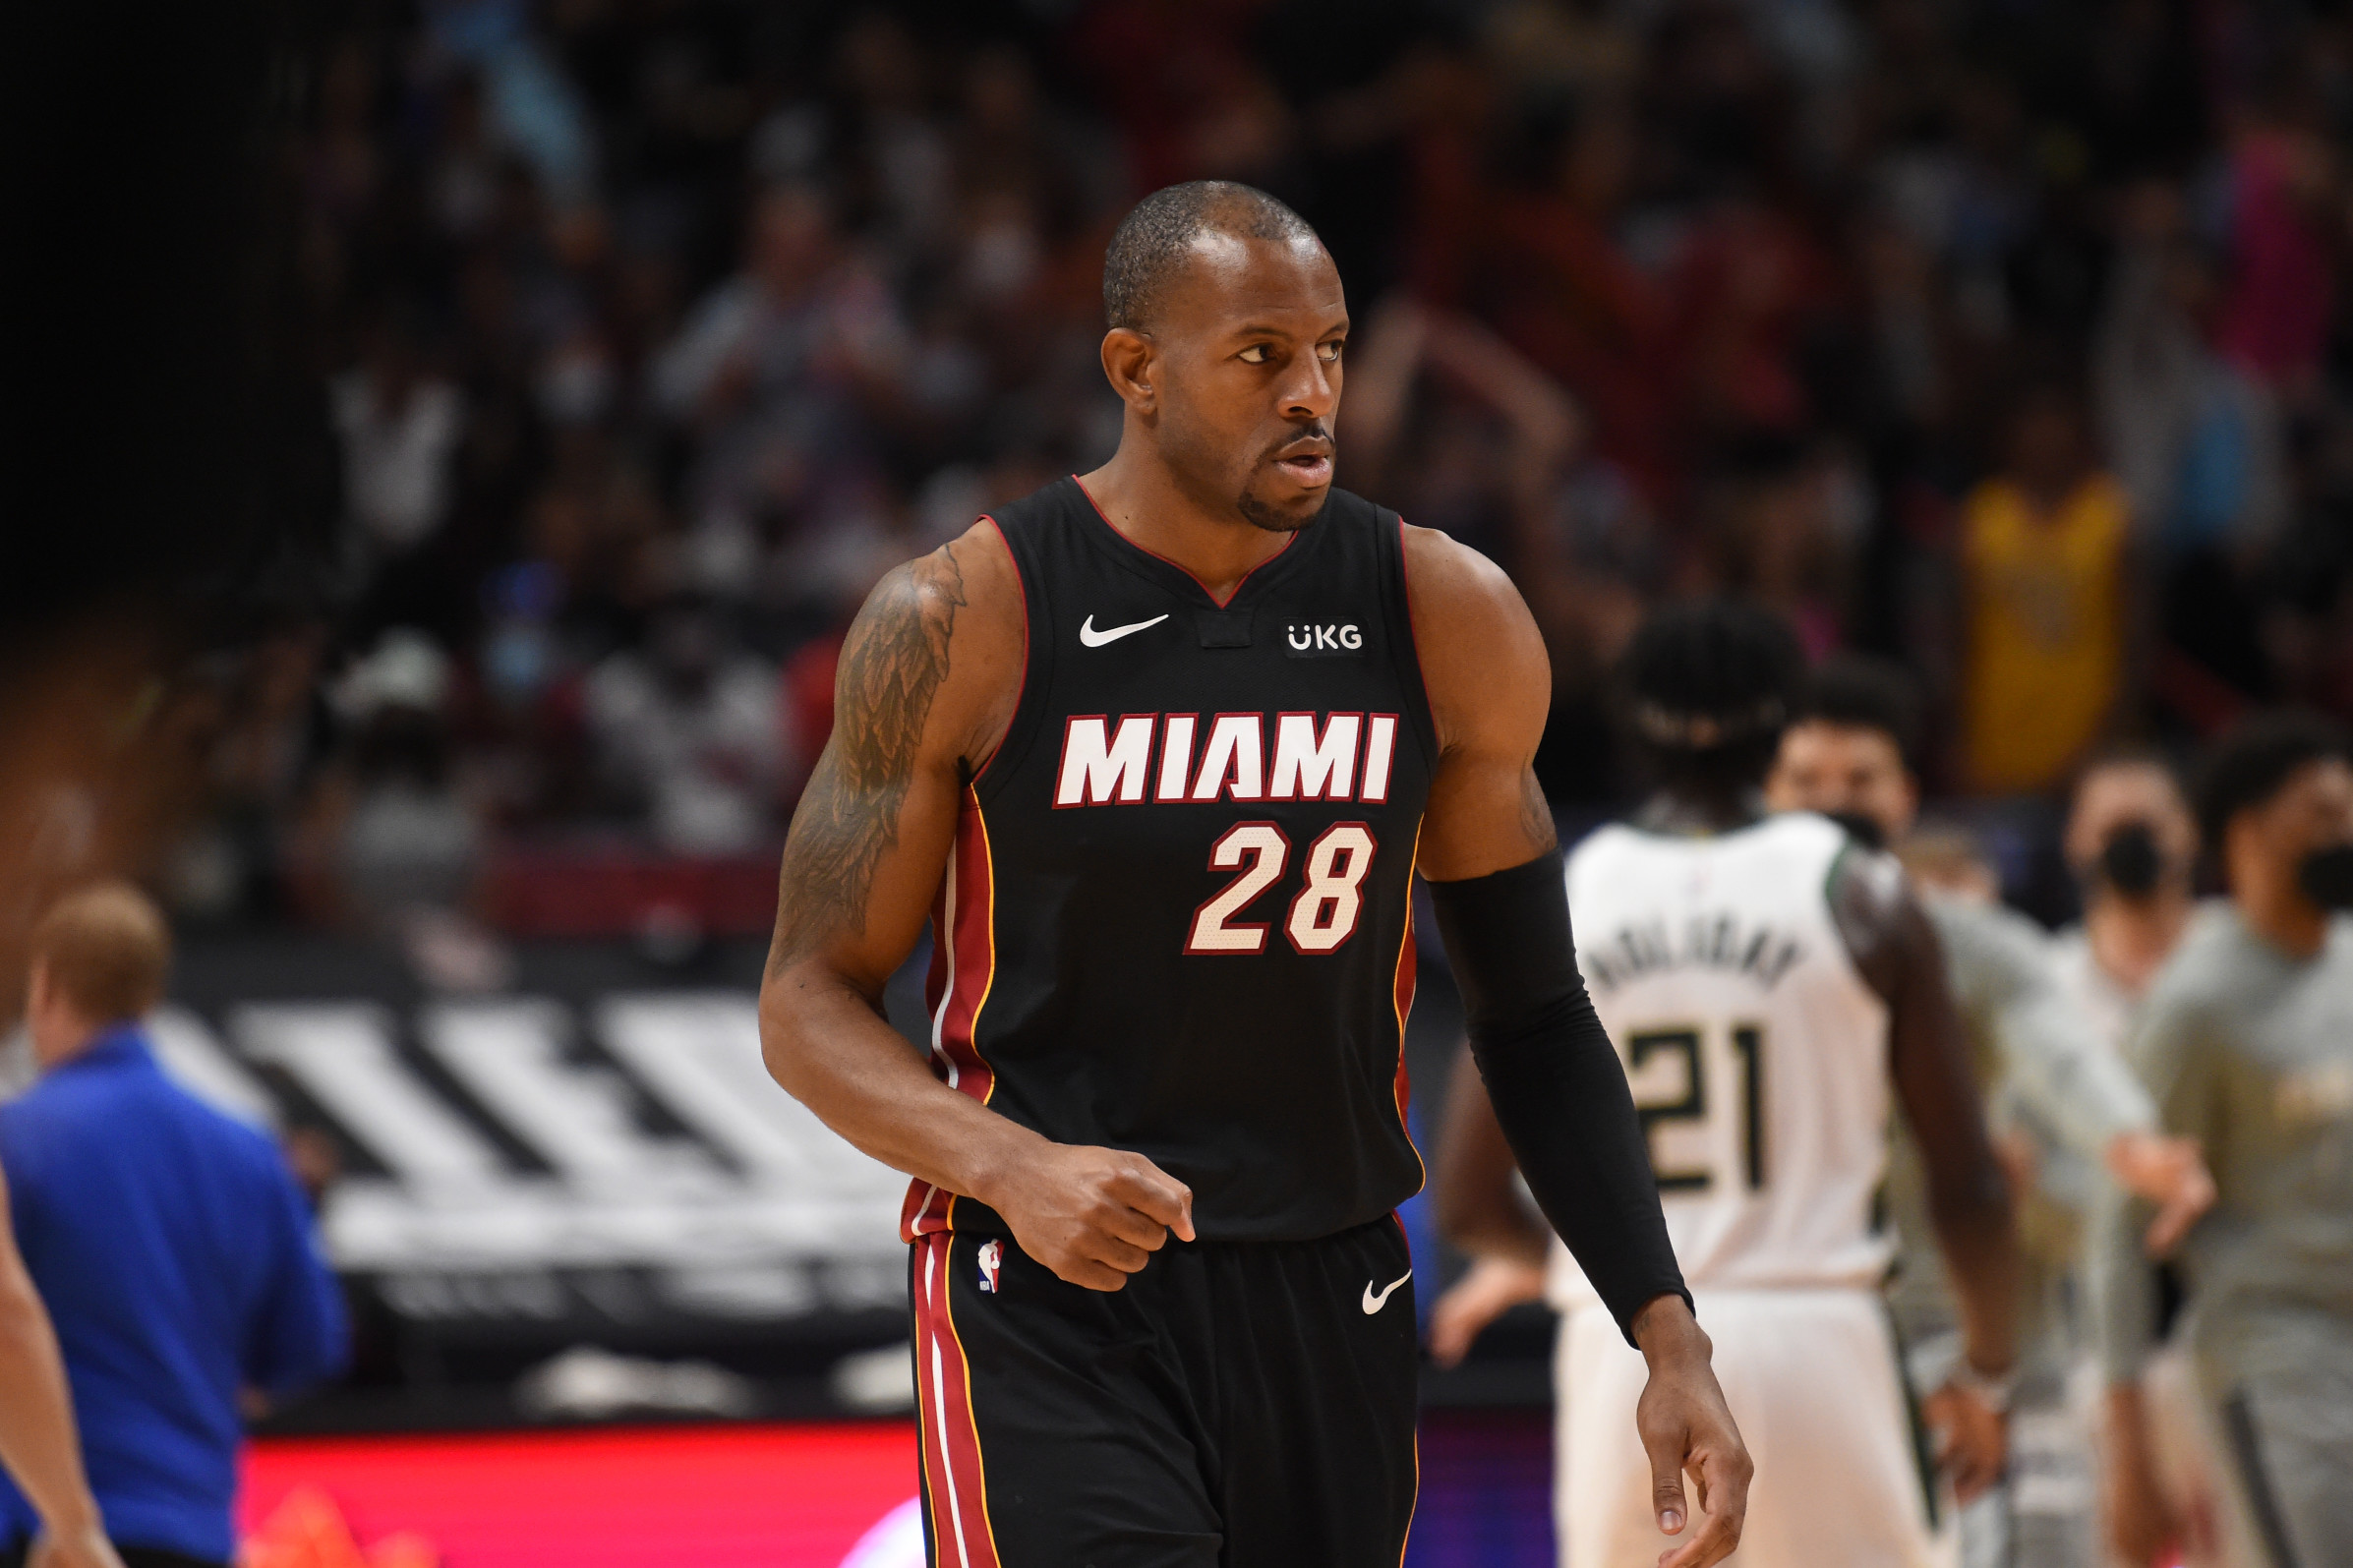 Heat: Andre Iguodala is everything Miami wanted him to be in his debut